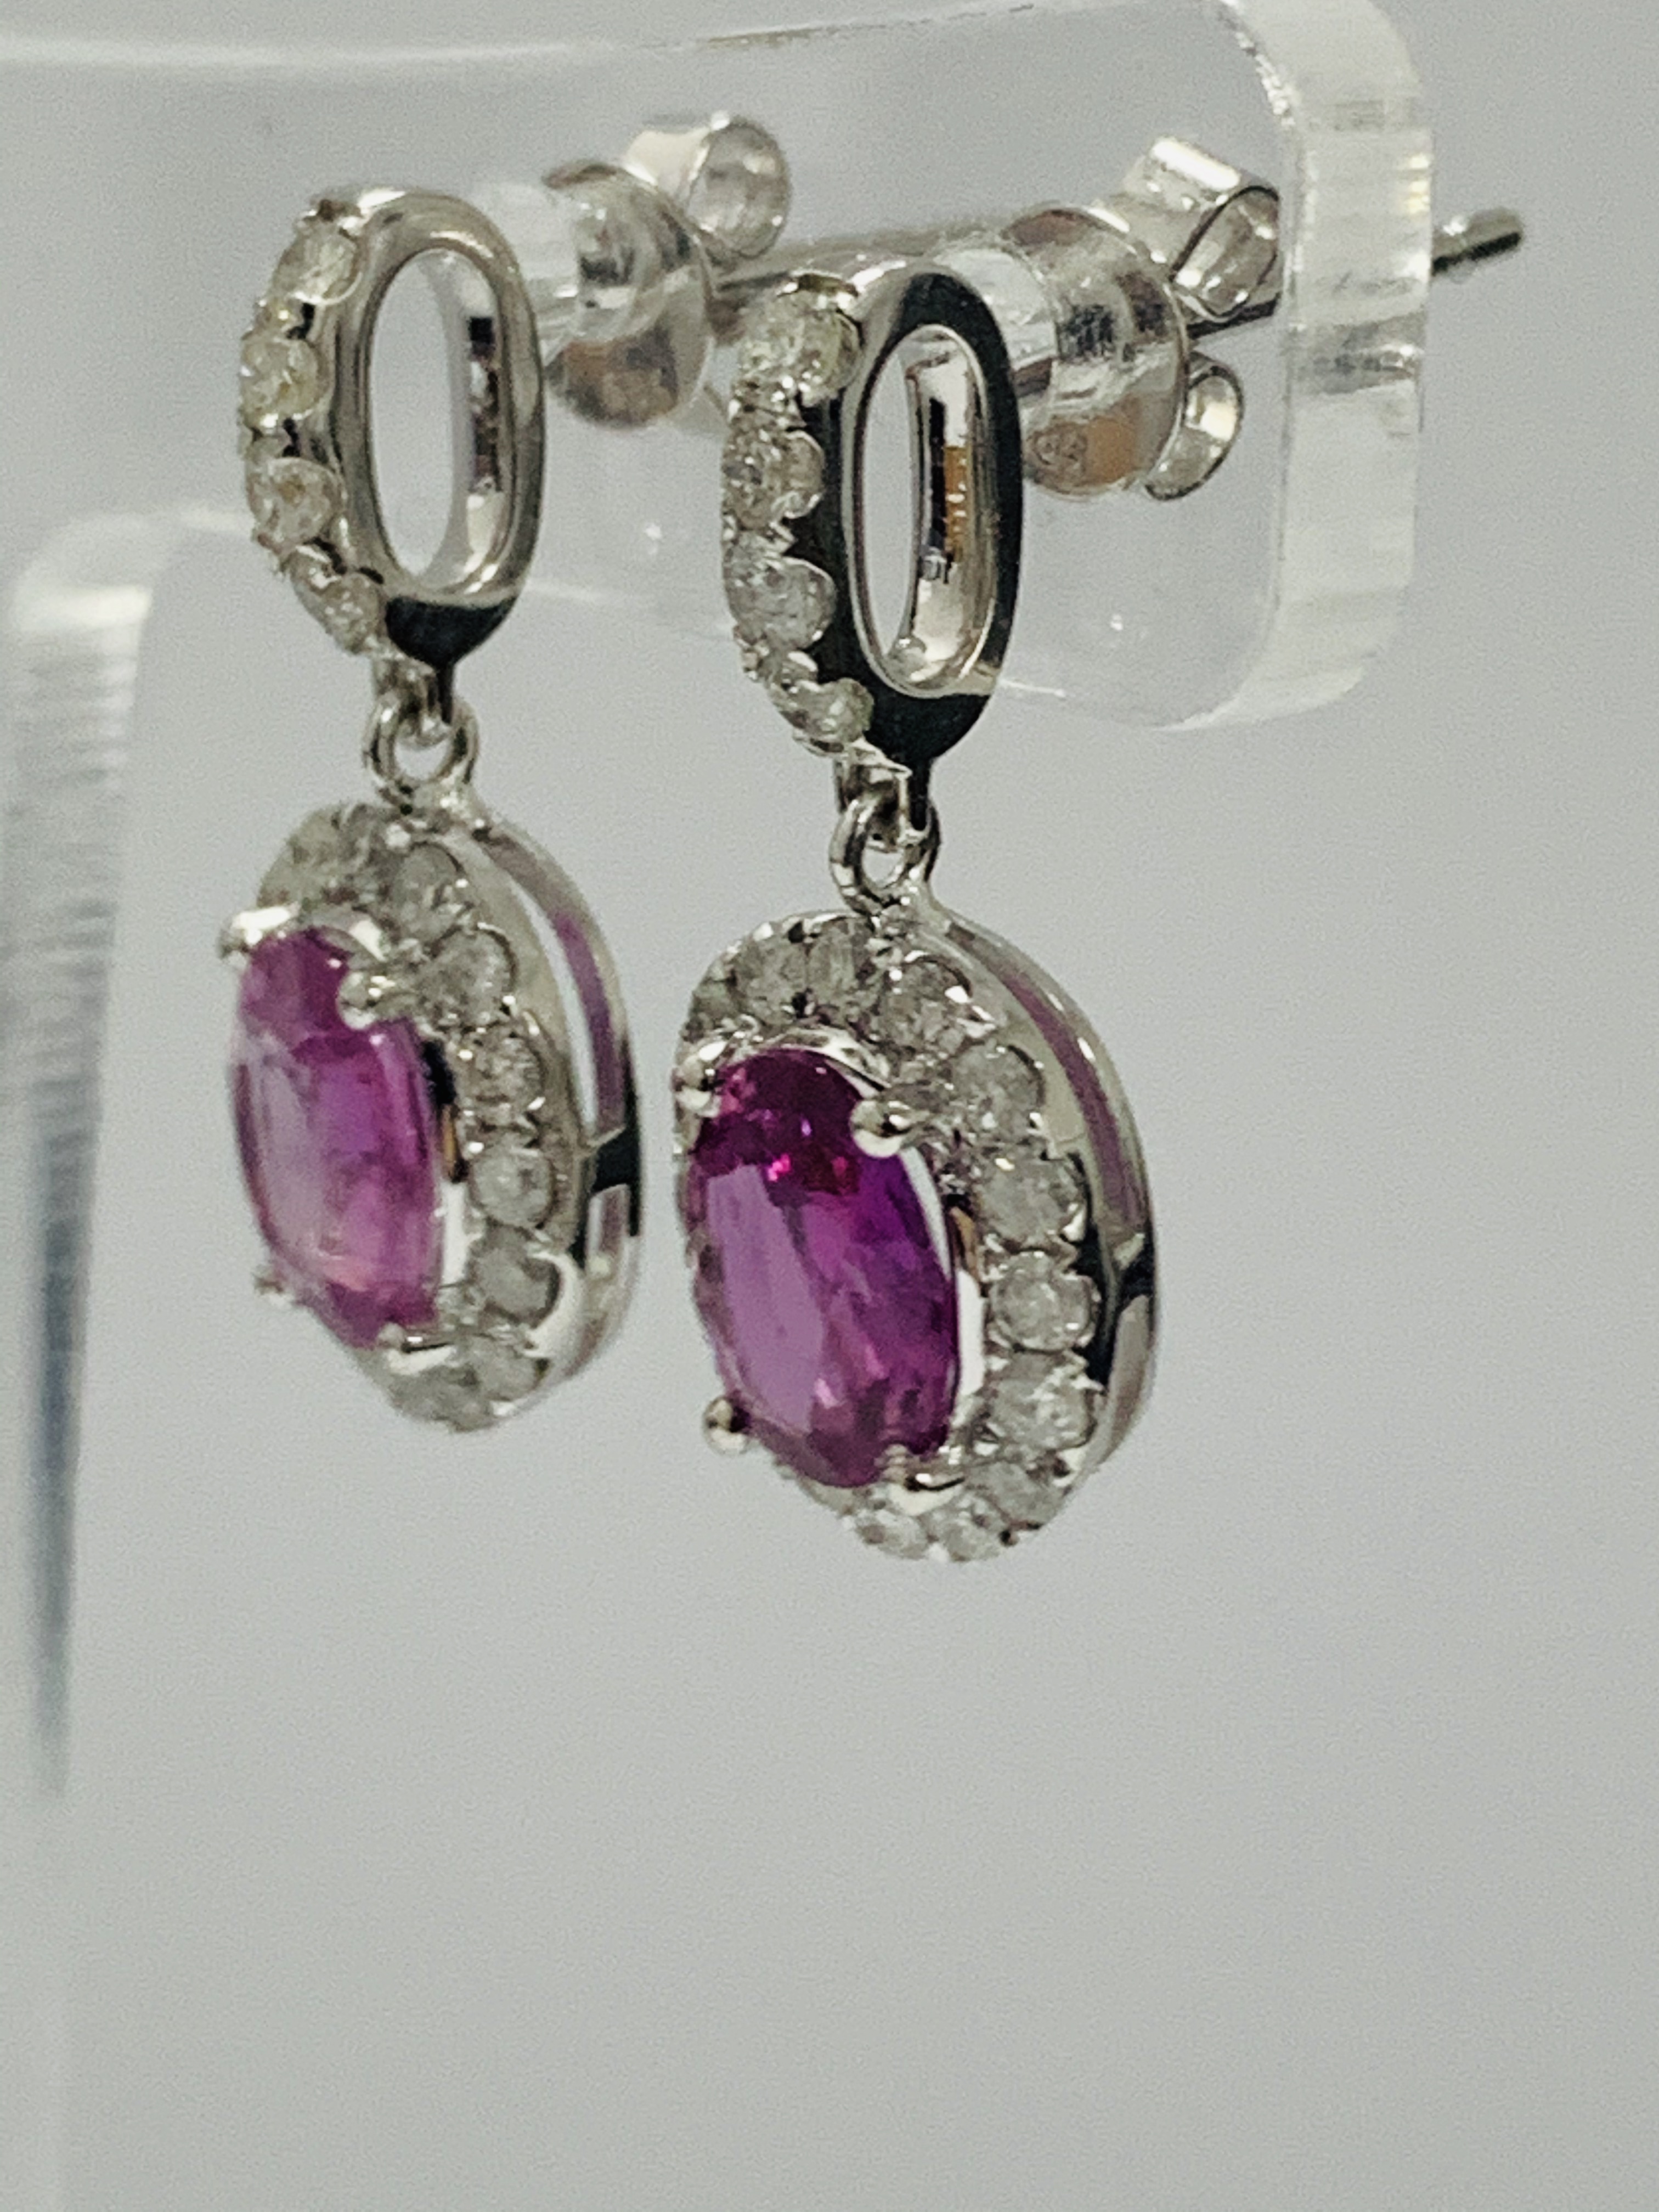 14ct White Gold Sapphire and Diamond drop earrings featuring, 2 oval cut, pink Sapphires (1.66ct TSW - Image 8 of 9